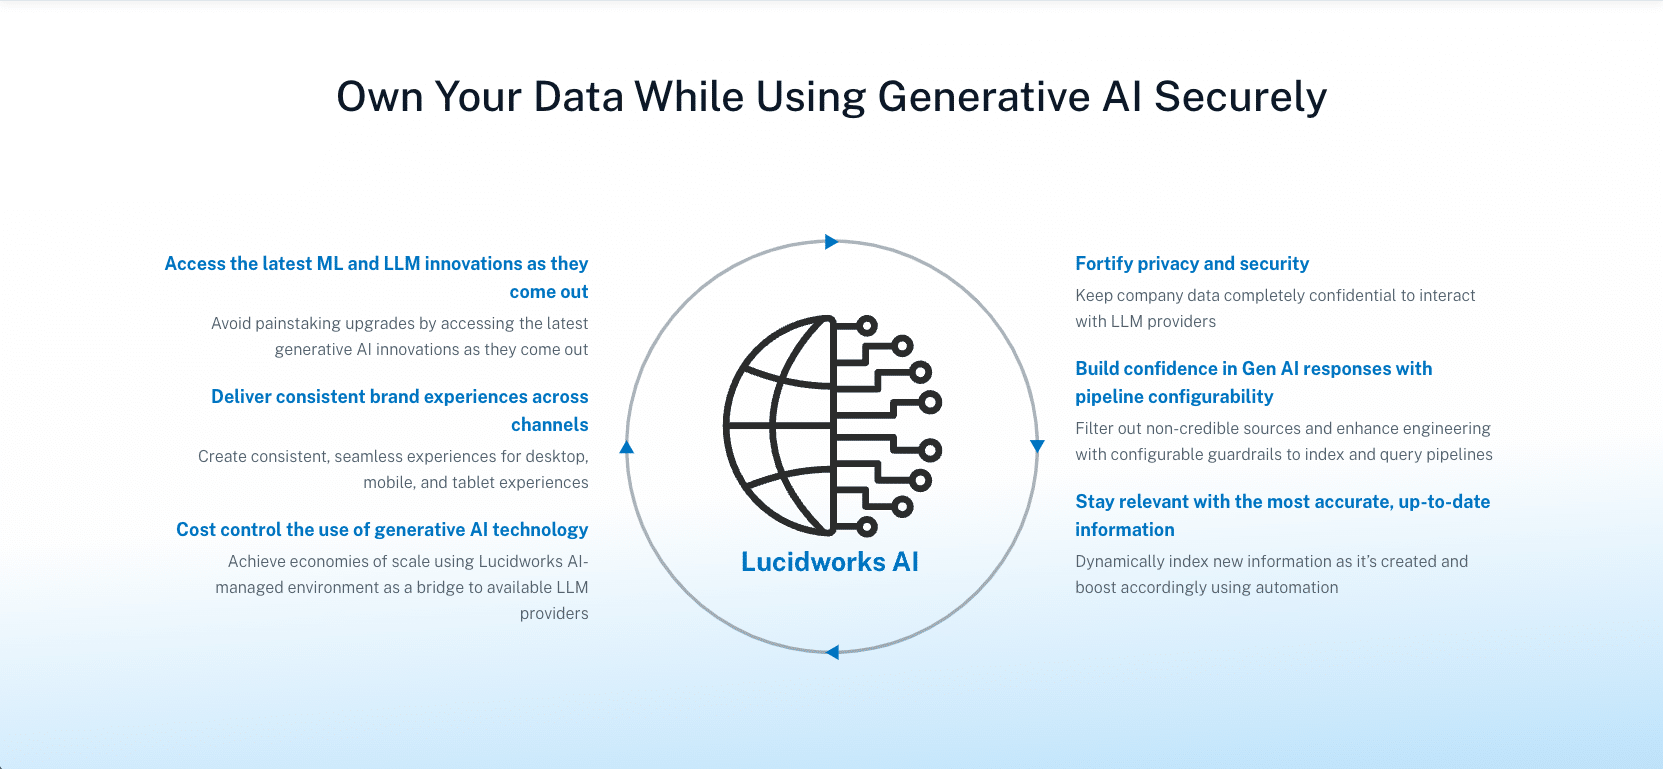 Screenshot explaining how Lucidworks AI enables companies to own their data while using generative ai for search experiences securely.